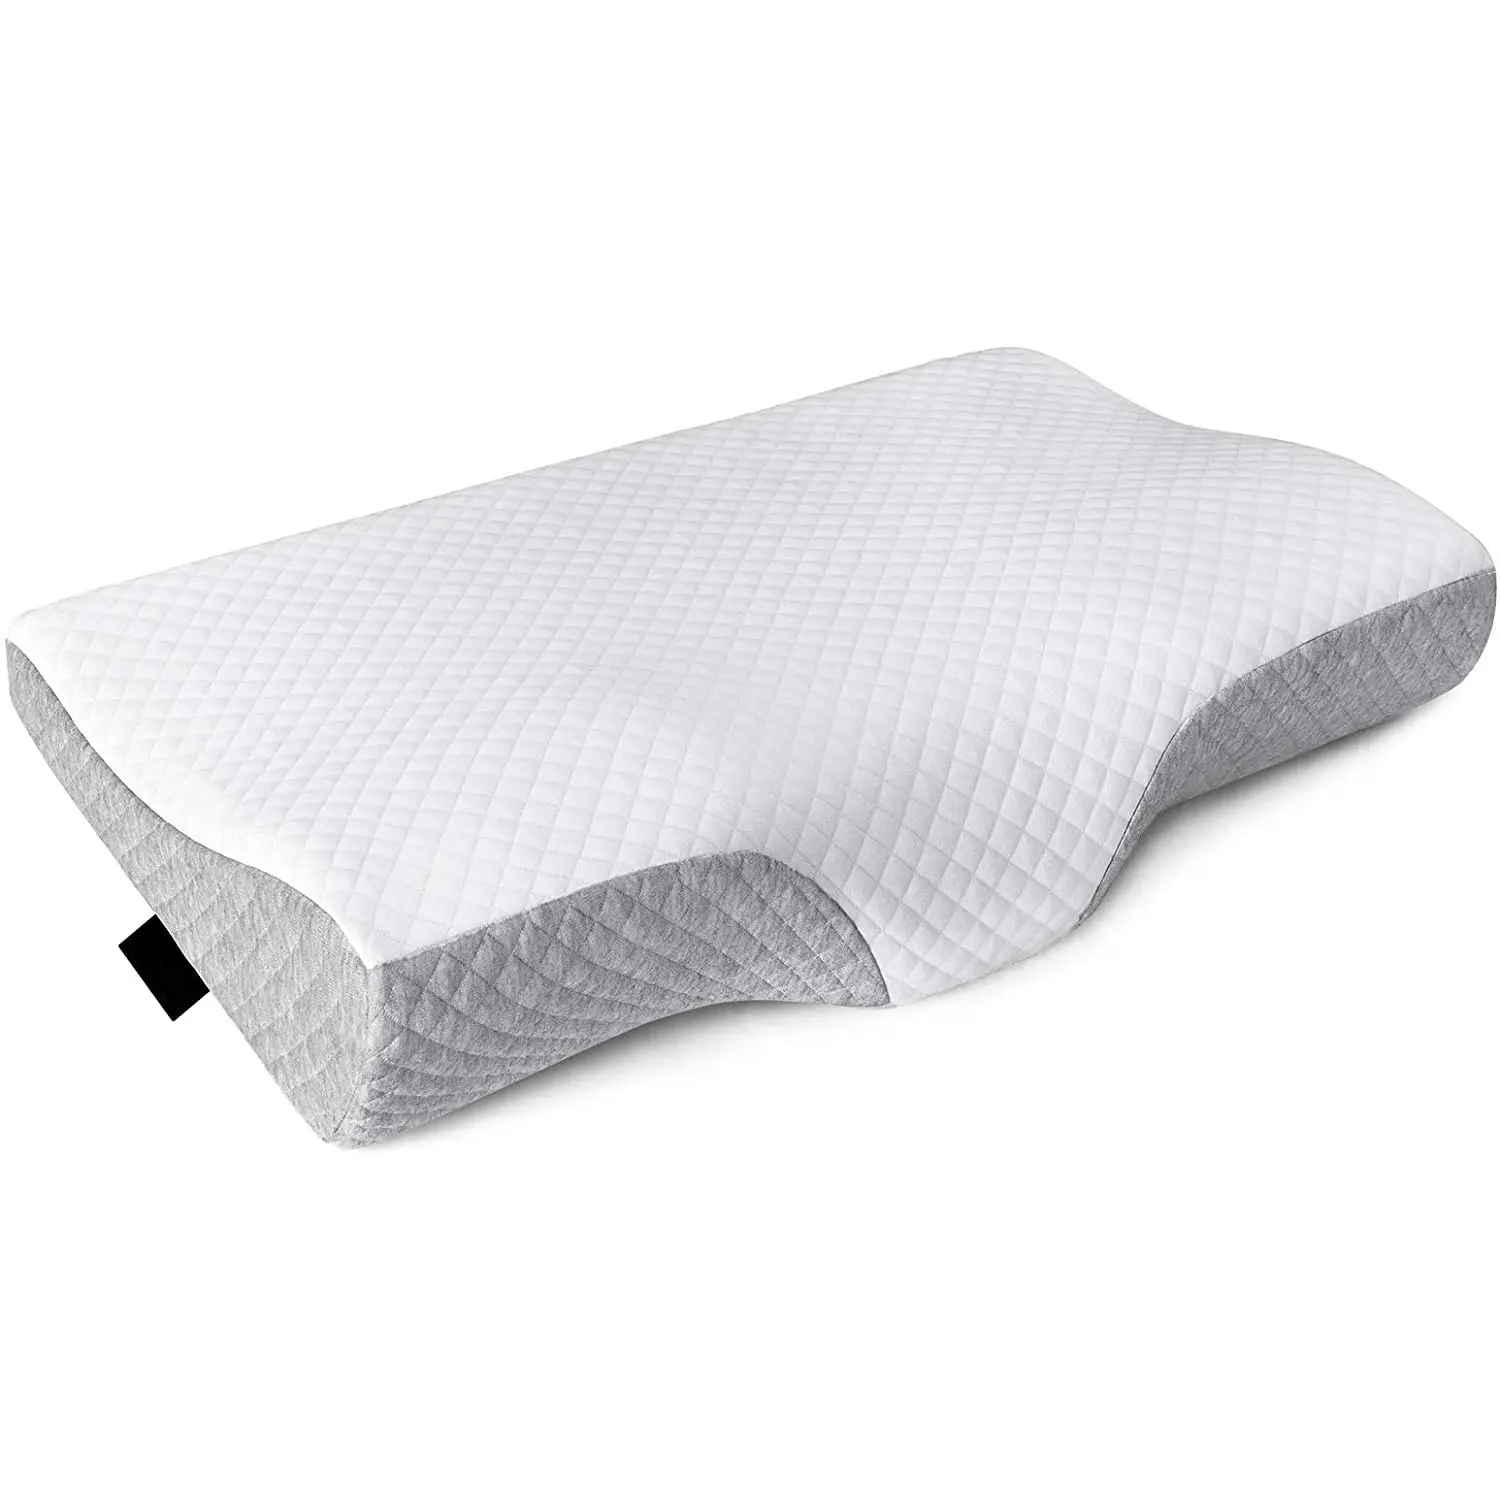 Wholesale Custom Cervical Butterfly Shape Memory Foam Pillow For Neck Pain Contour Anti Snore Sleep Bed Memory Foam Bed Pillow